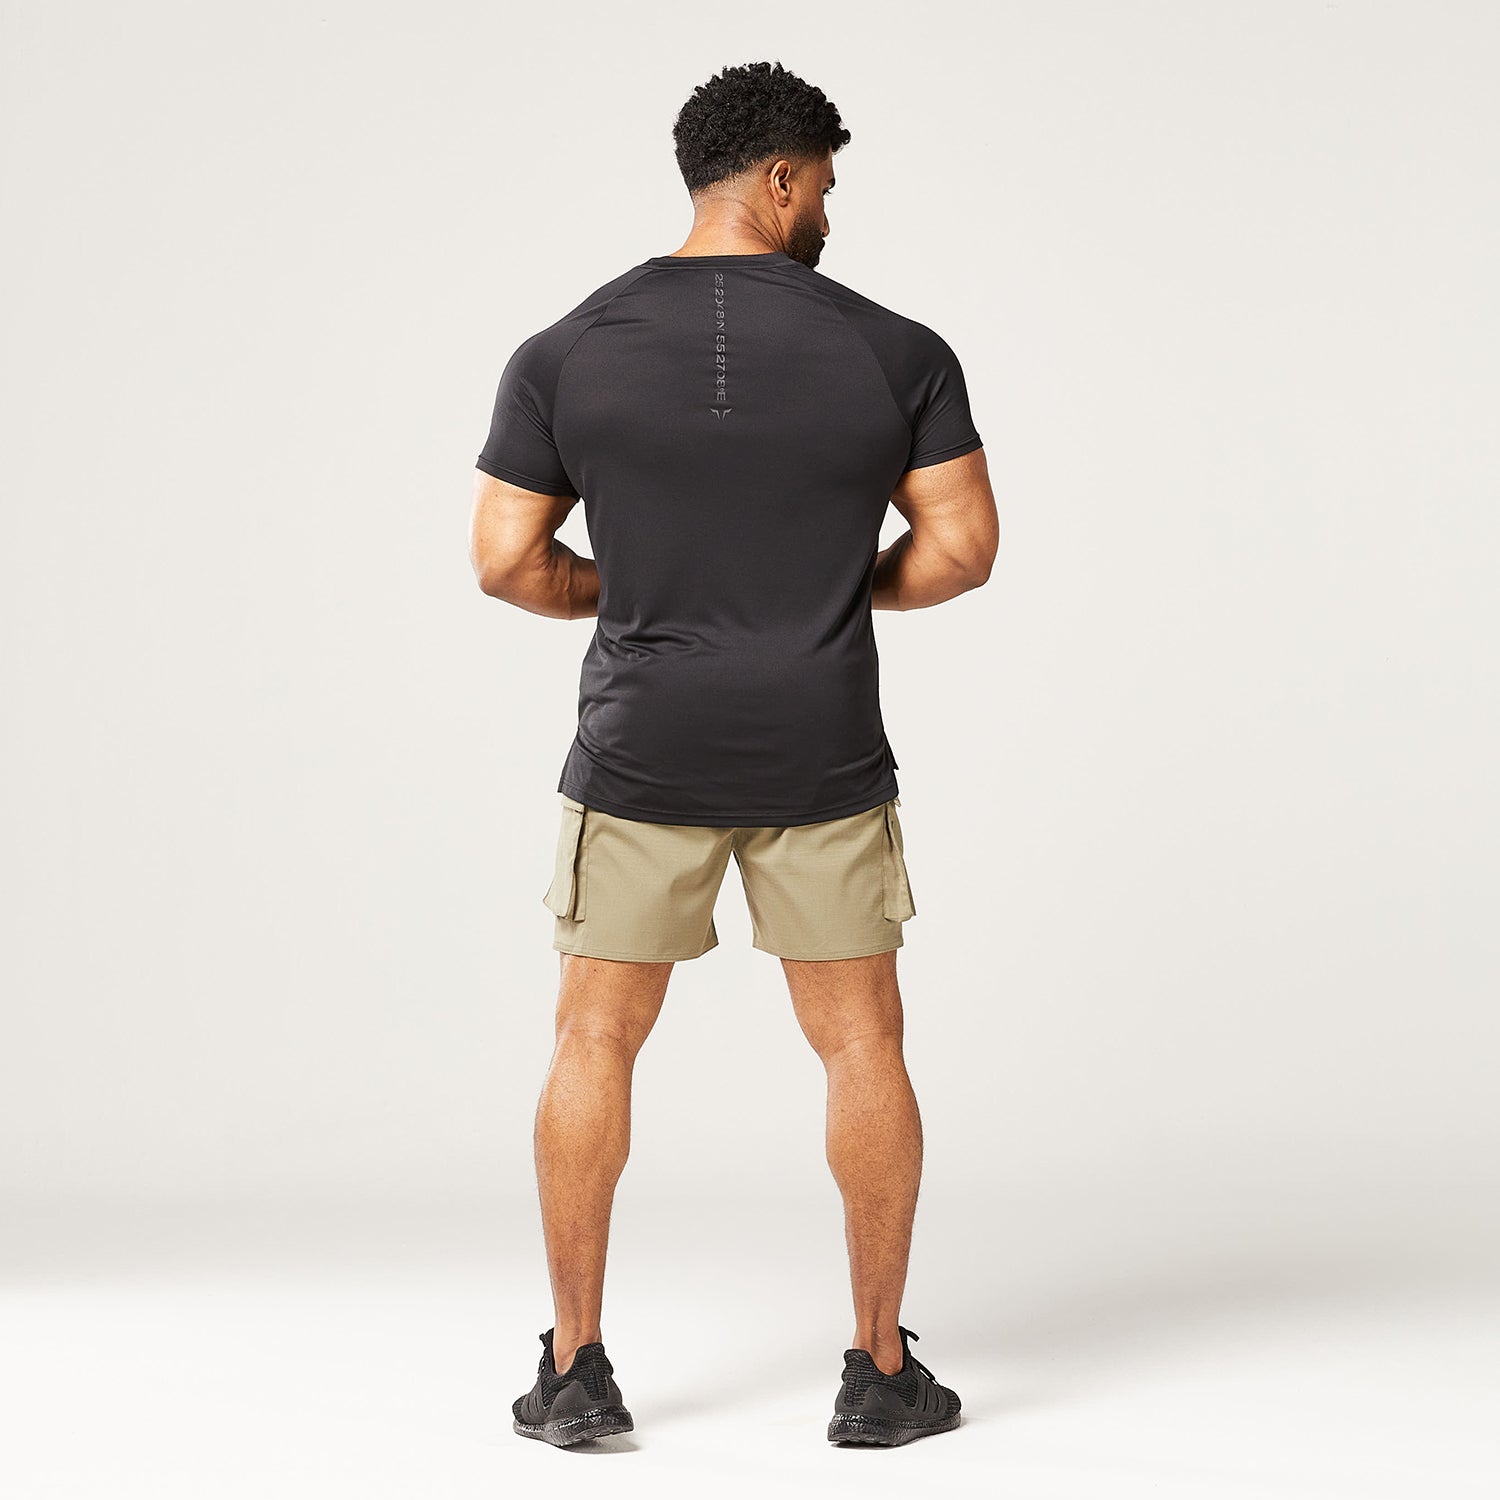 squatwolf-gym-wear-code-muscle-tee-black-workout-shirts-for-men